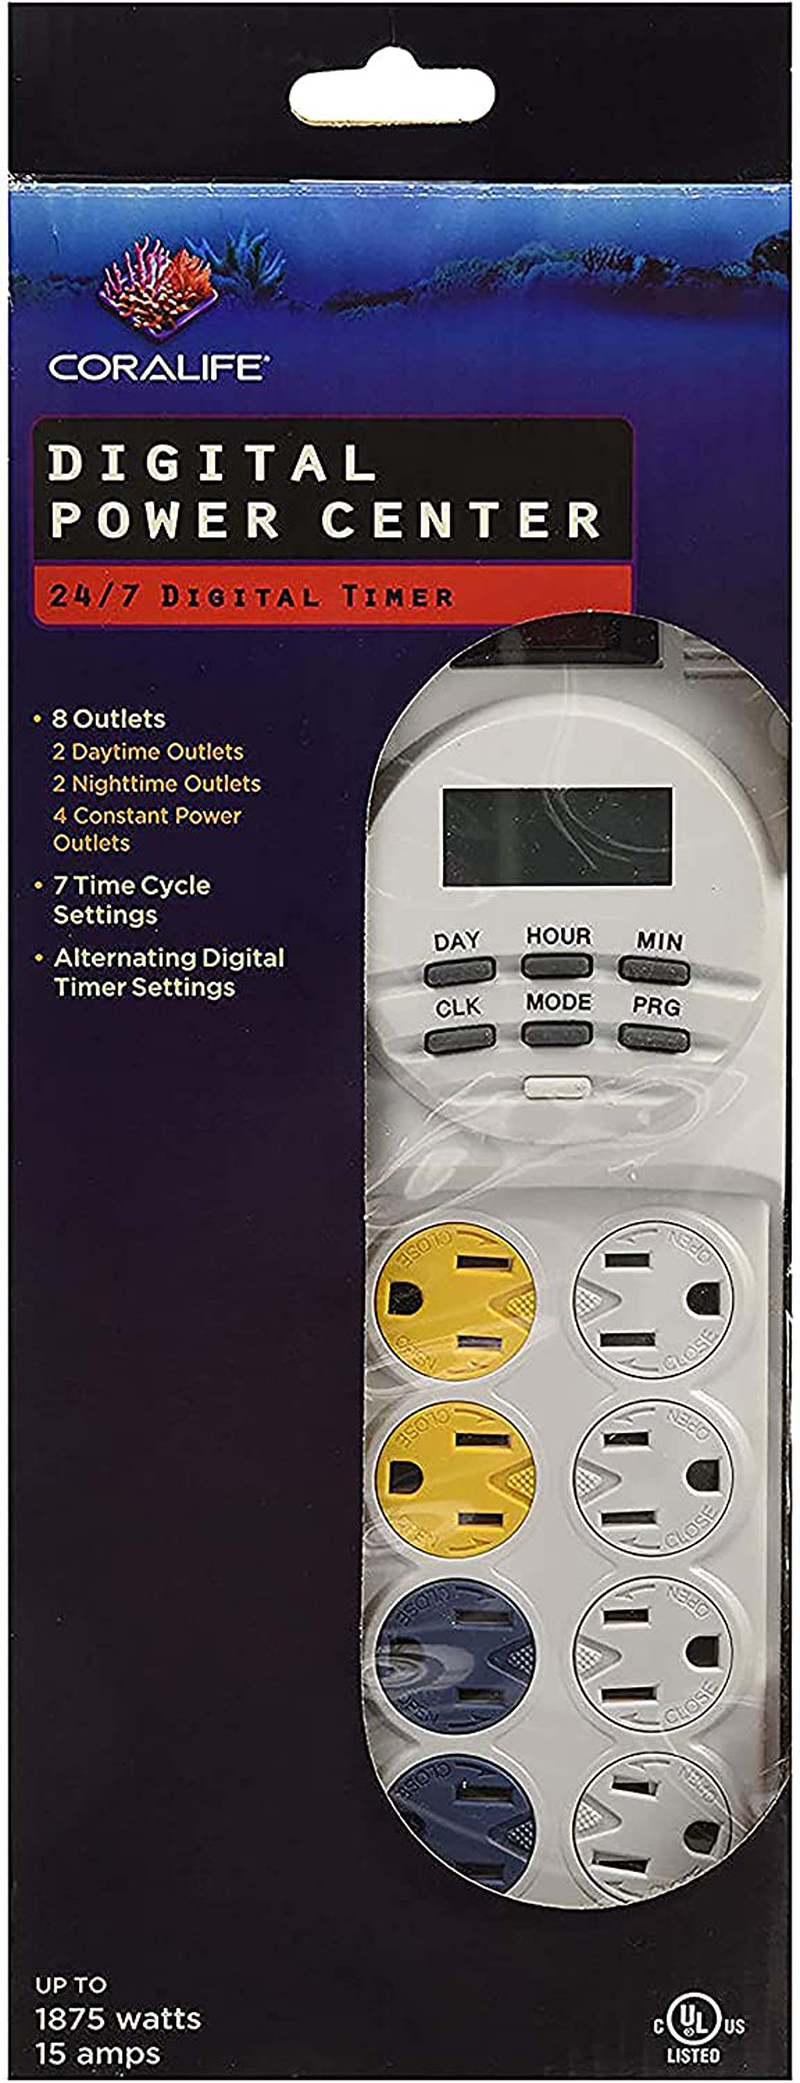 Coralife Digital Power Center 24/7 Digital Timer, Up to 1875 amps Home & Garden > Lighting Accessories > Lighting Timers Coralife   